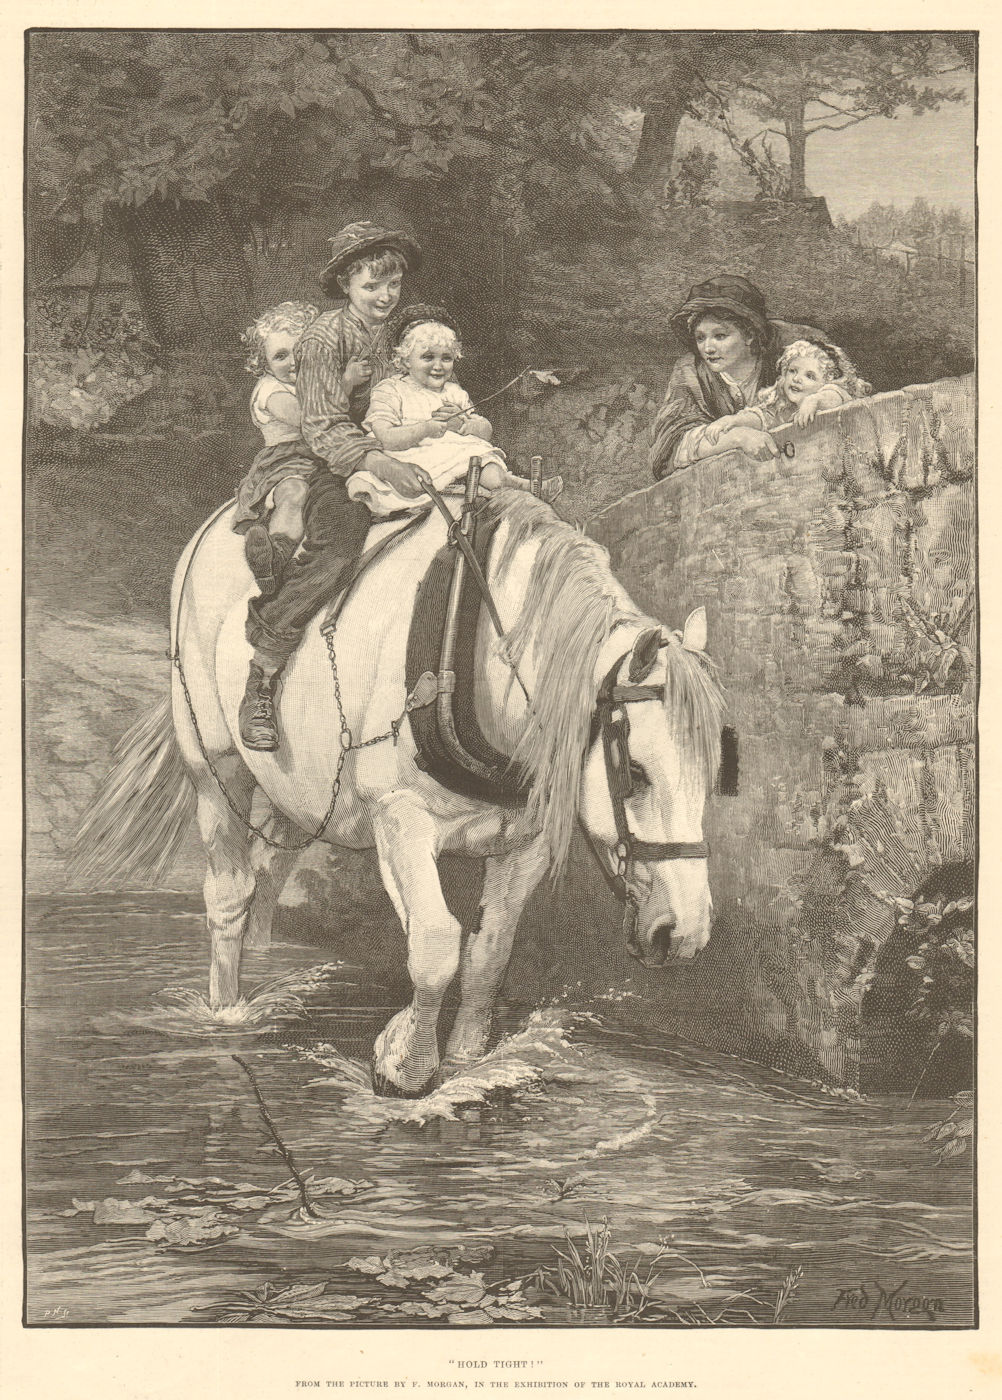 "Hold tight", from the picture by F. Morgan. Children. Horses 1891 print